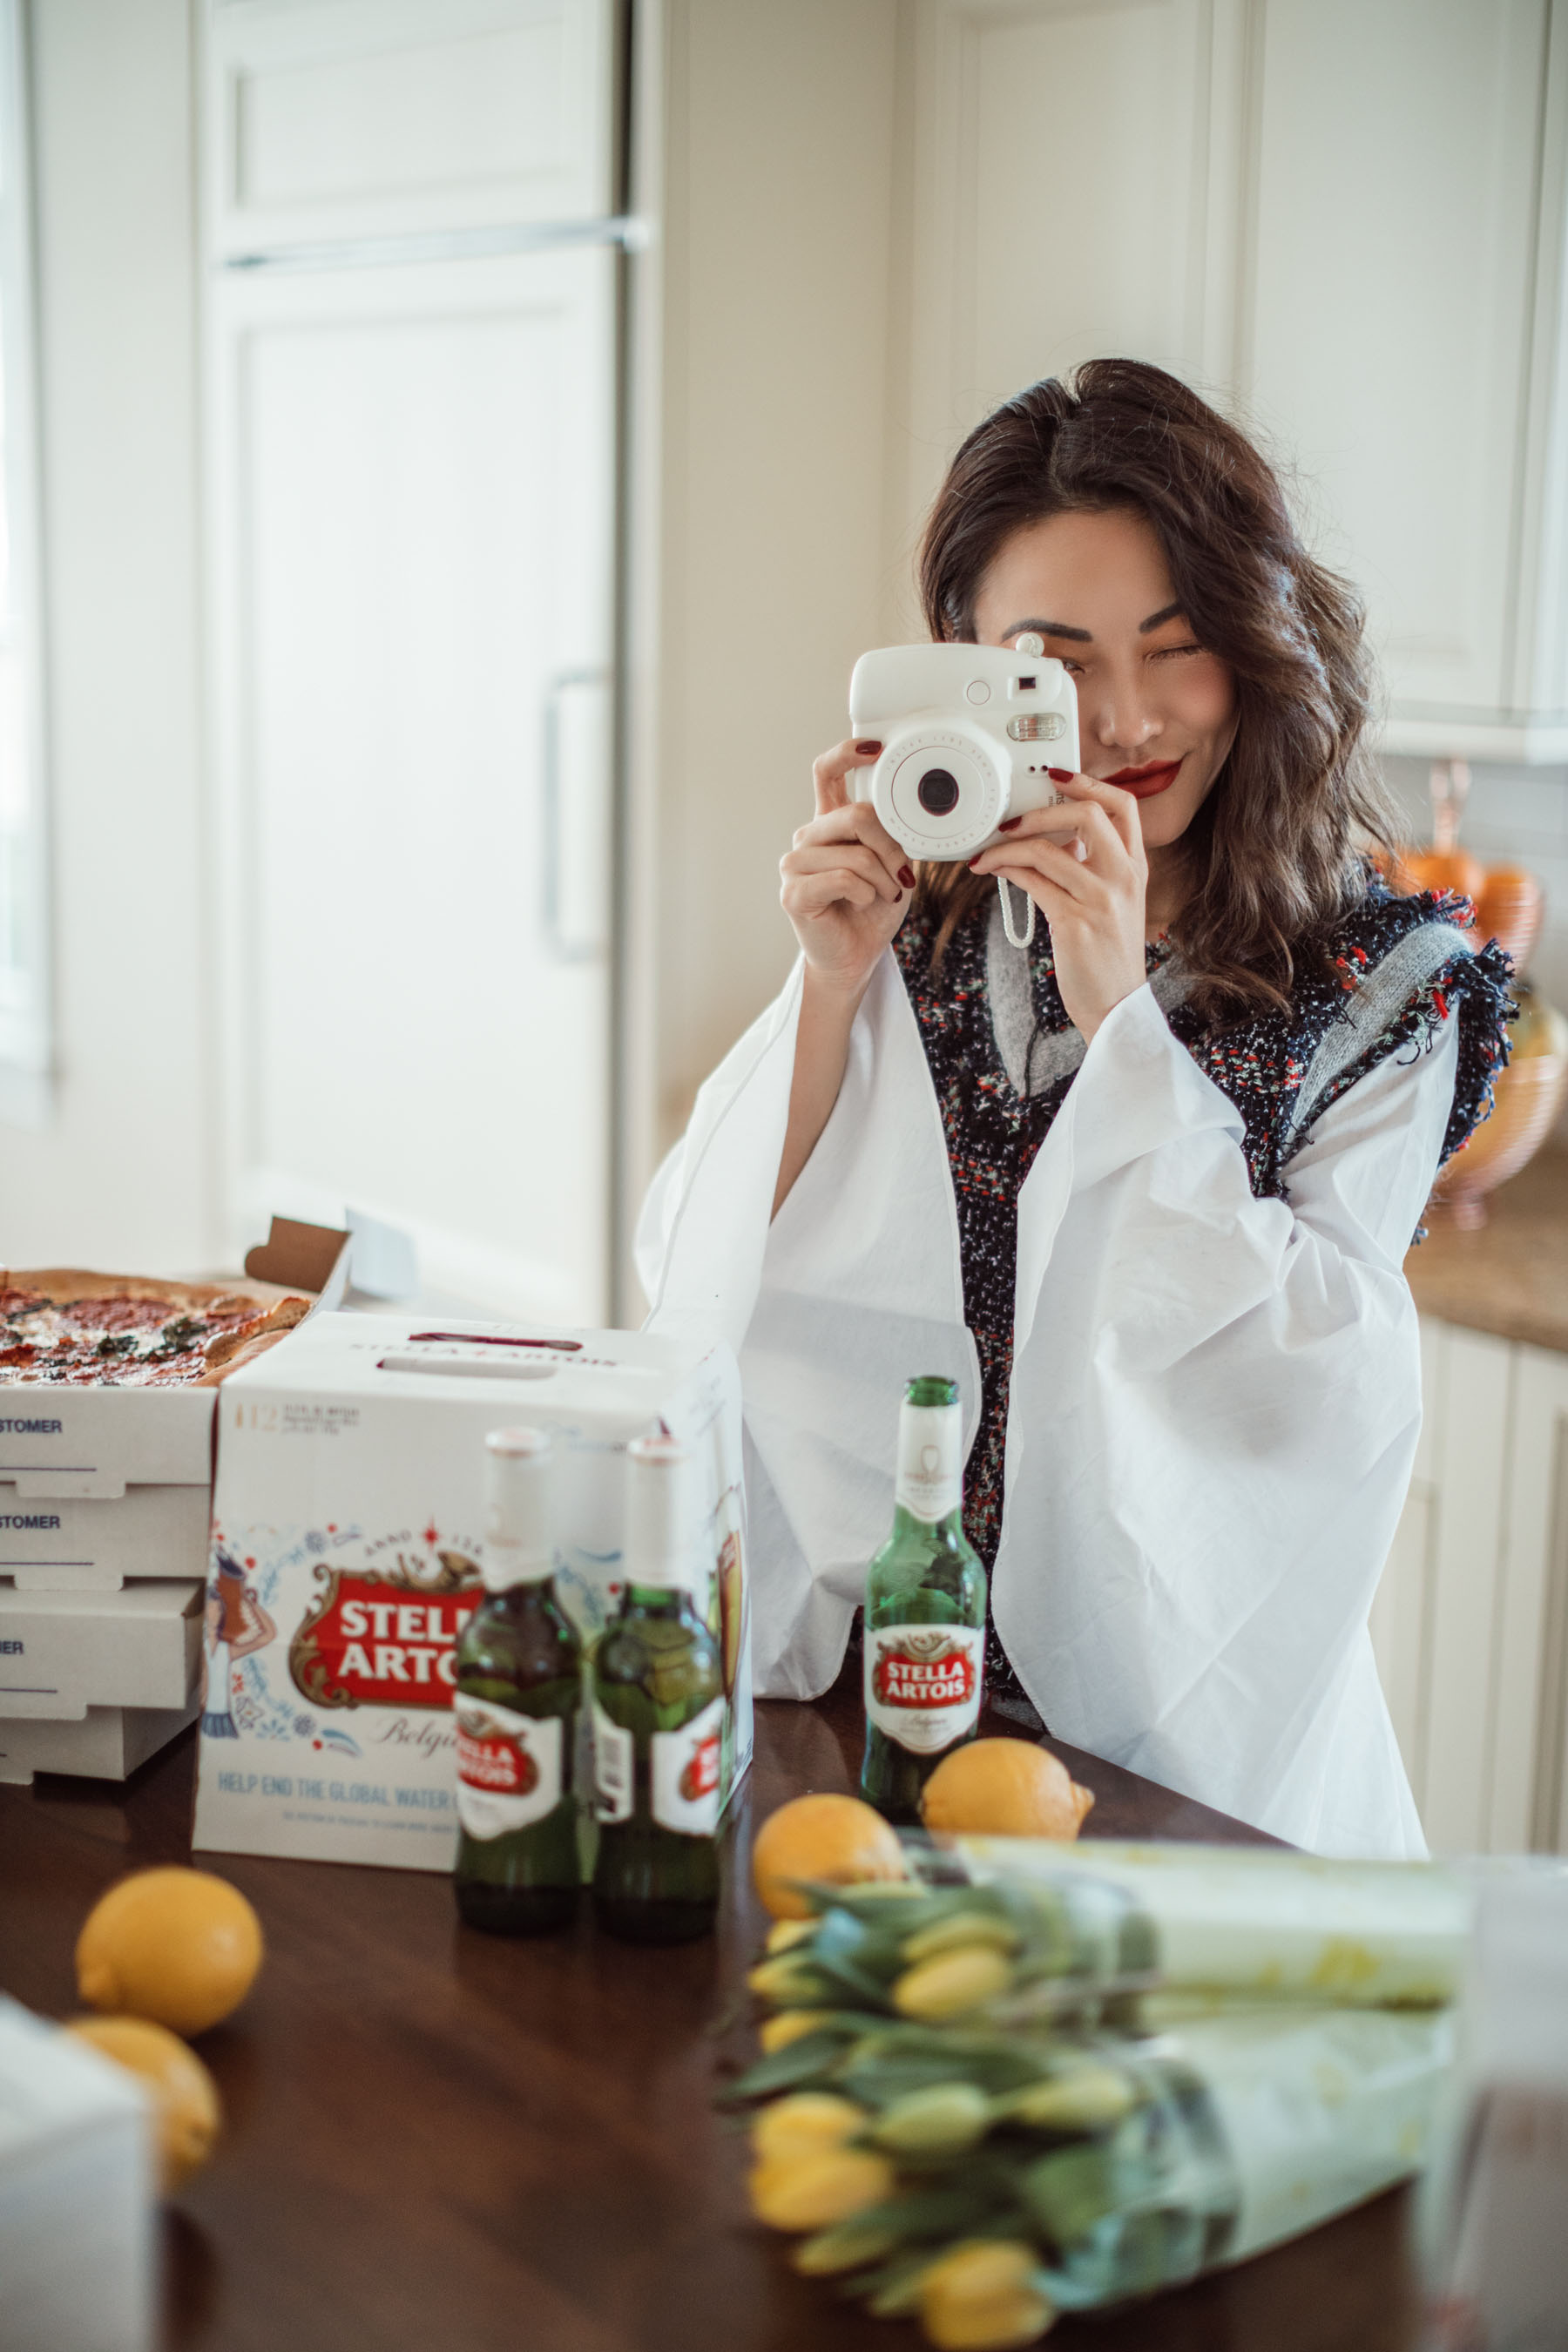 How to Throw a Super Bowl Party That Matters // Notjessfashion // Stella Artois, Super Bowl Party, fashion blogger, new york fashion blogger, jessica wang